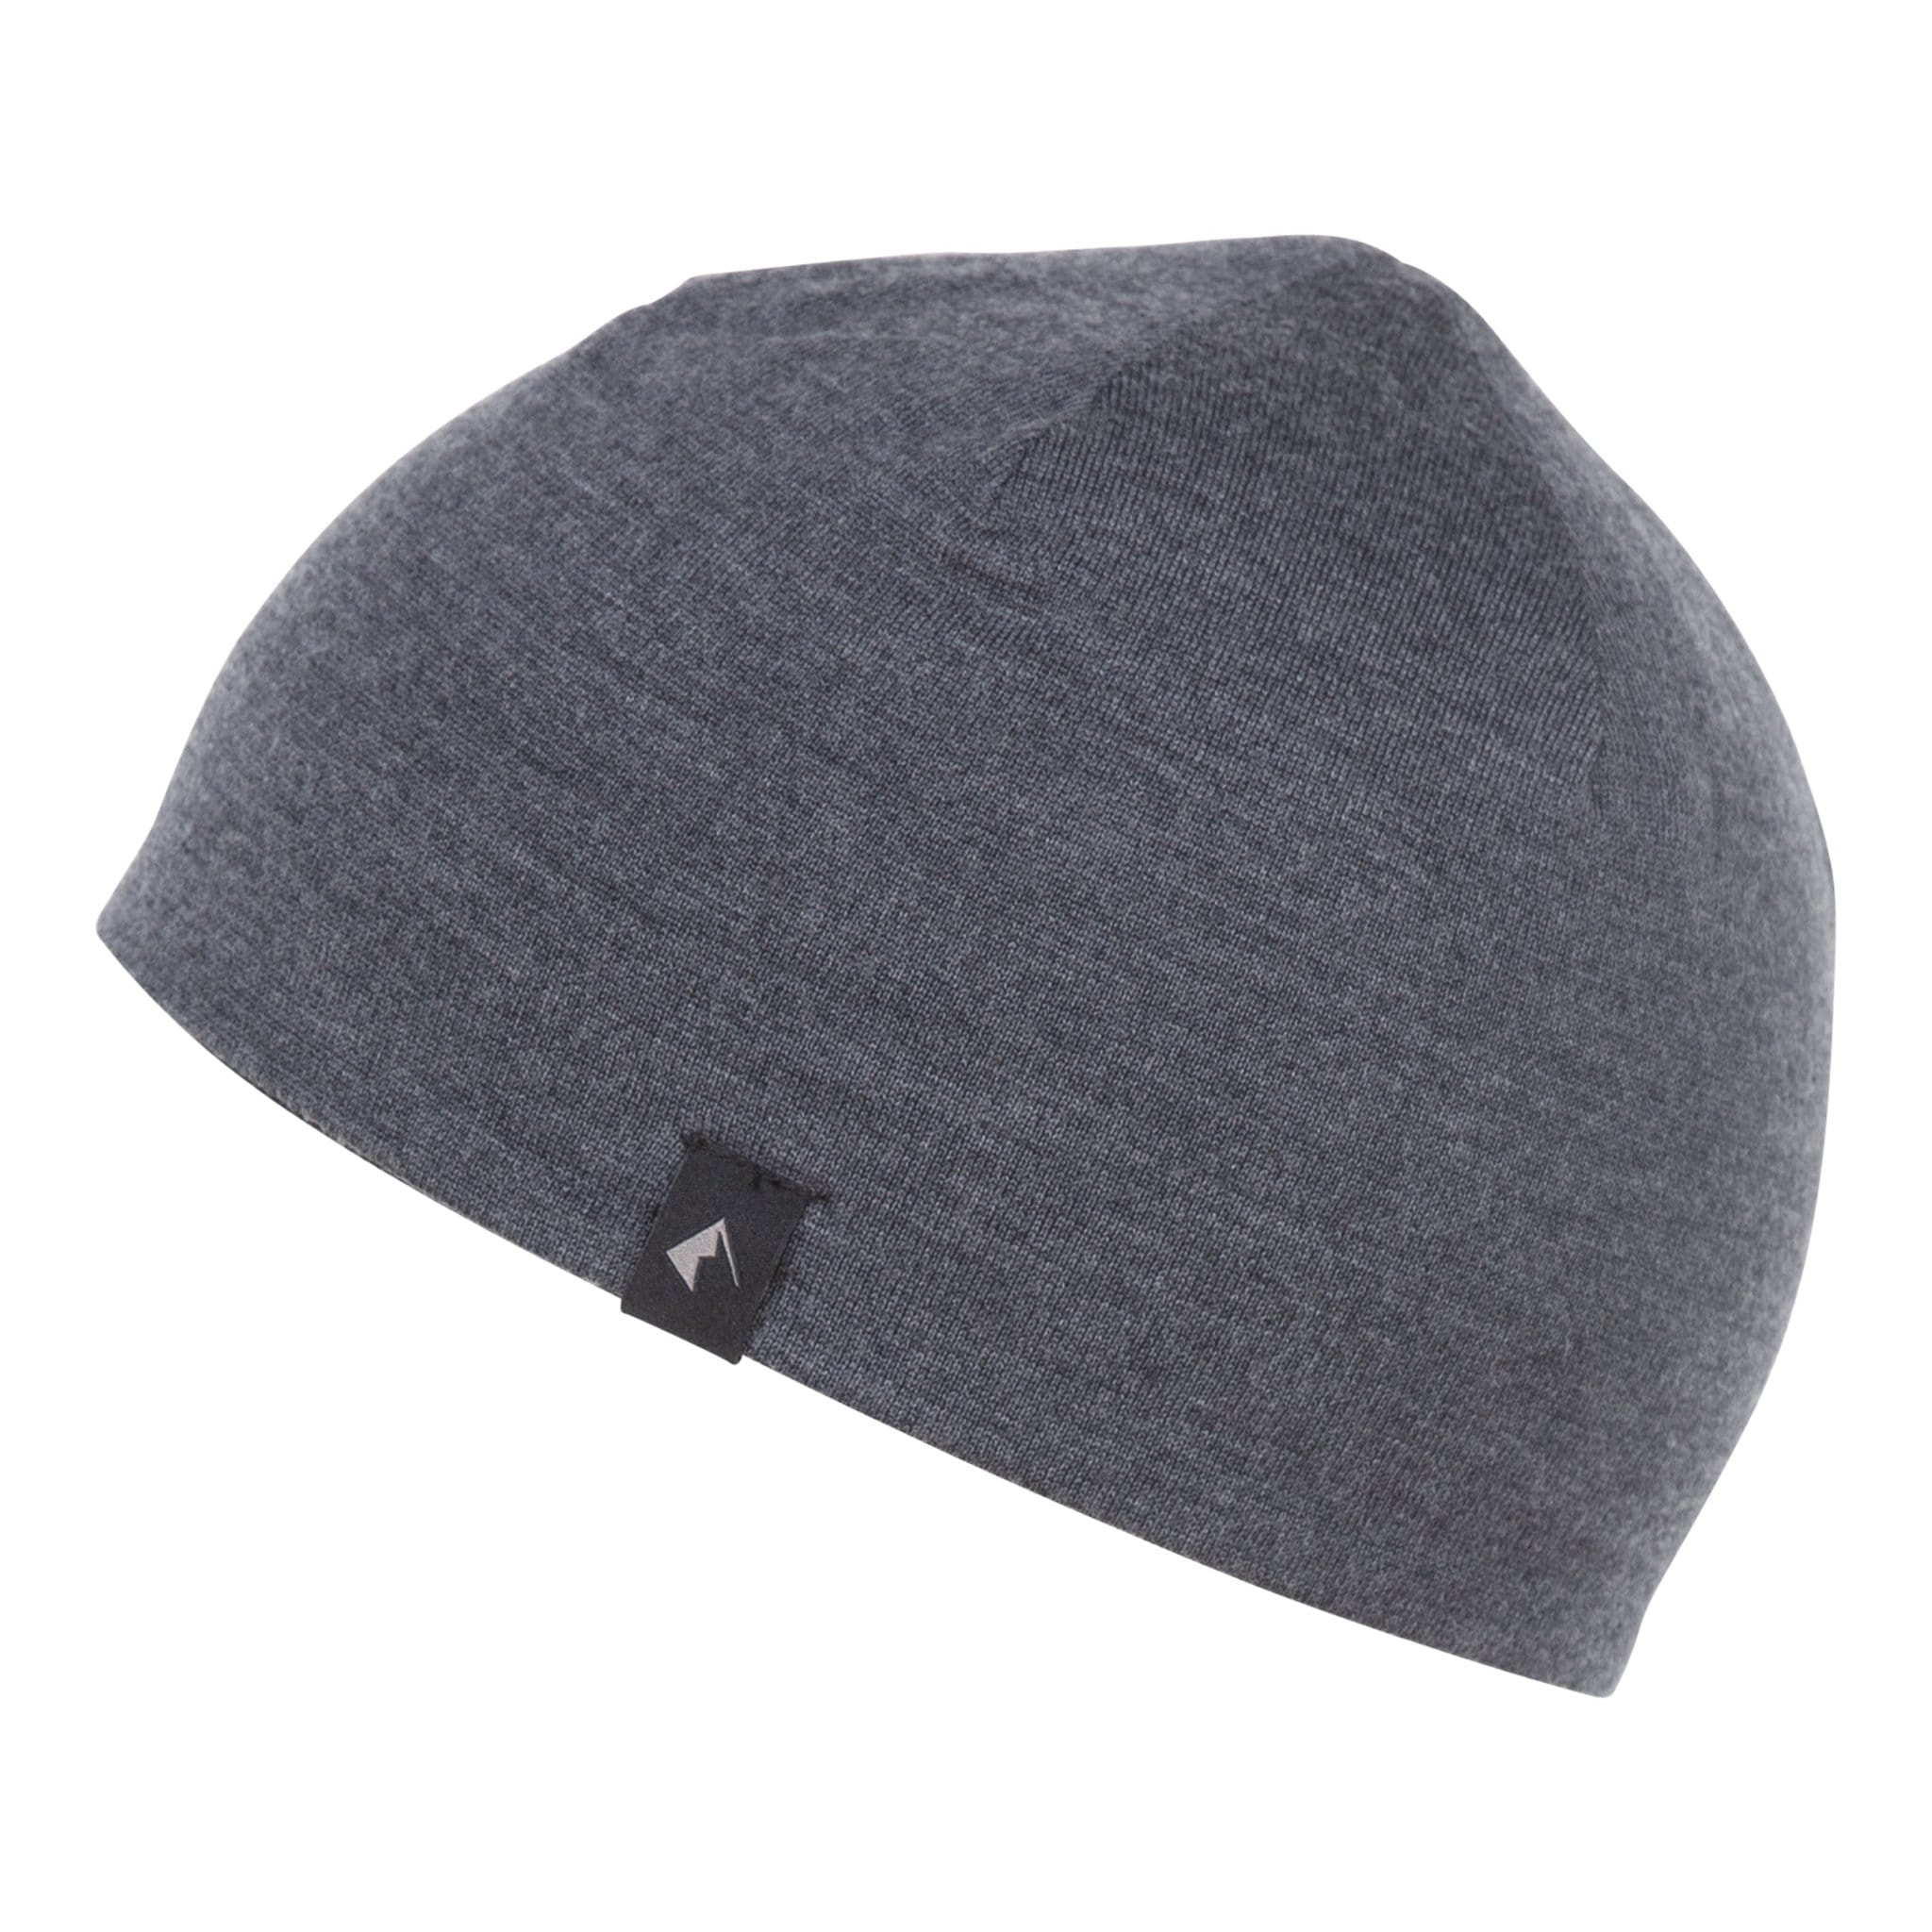 Inside color of Inversion Beanie 